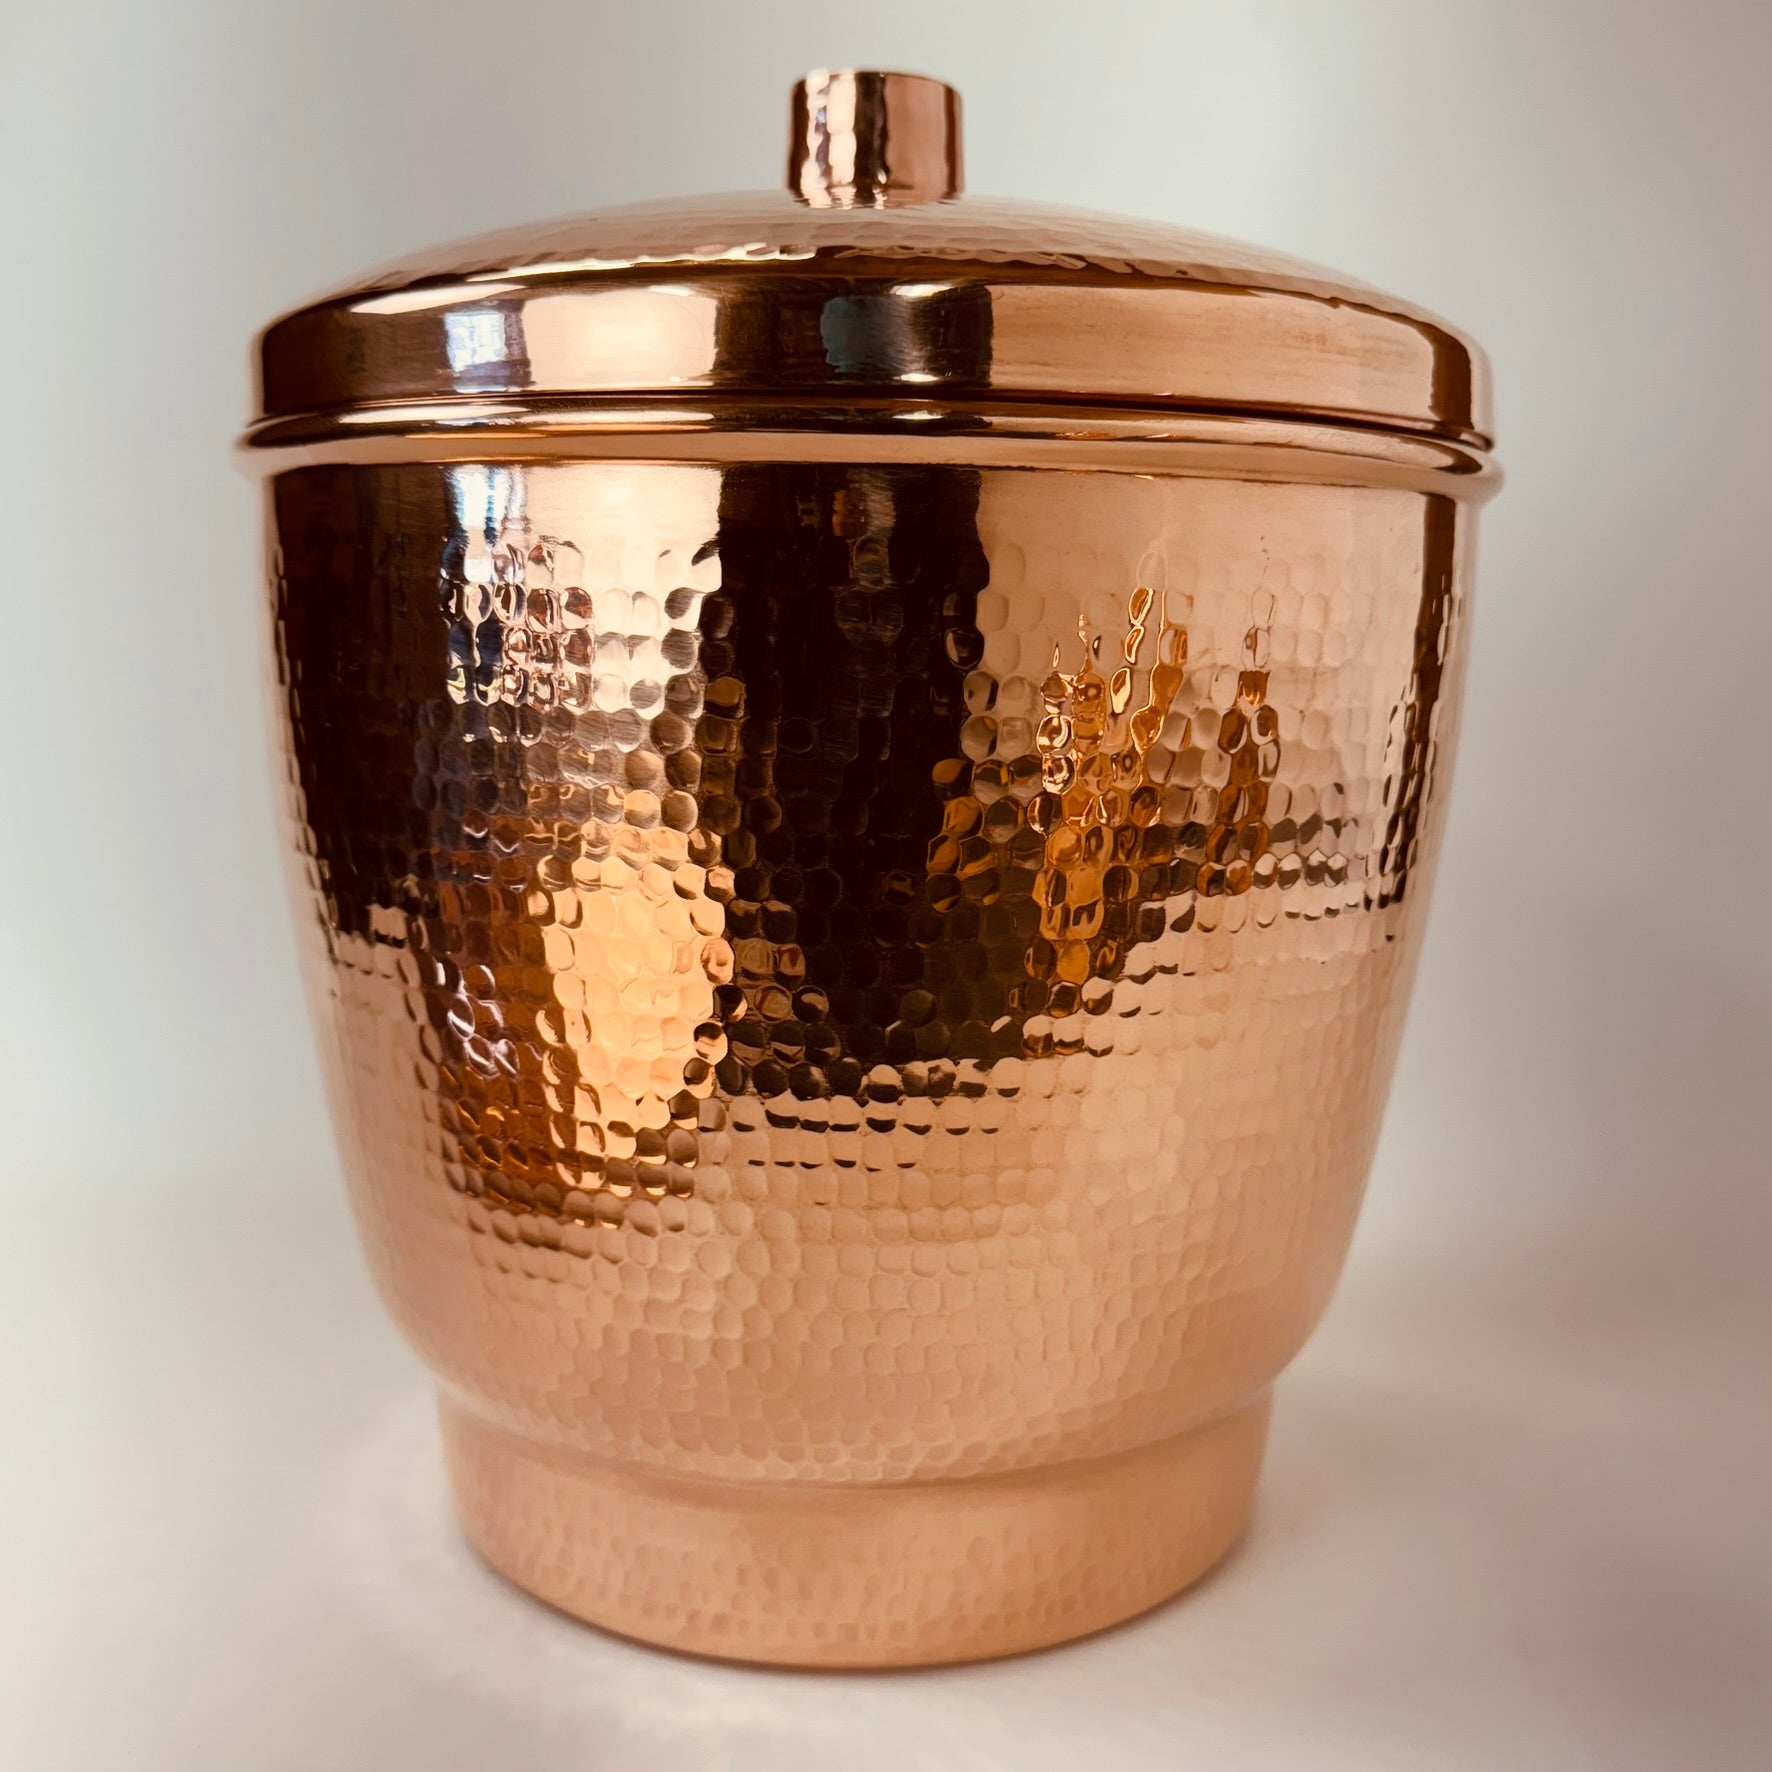 Niagara Copper Water Dispenser with Lid